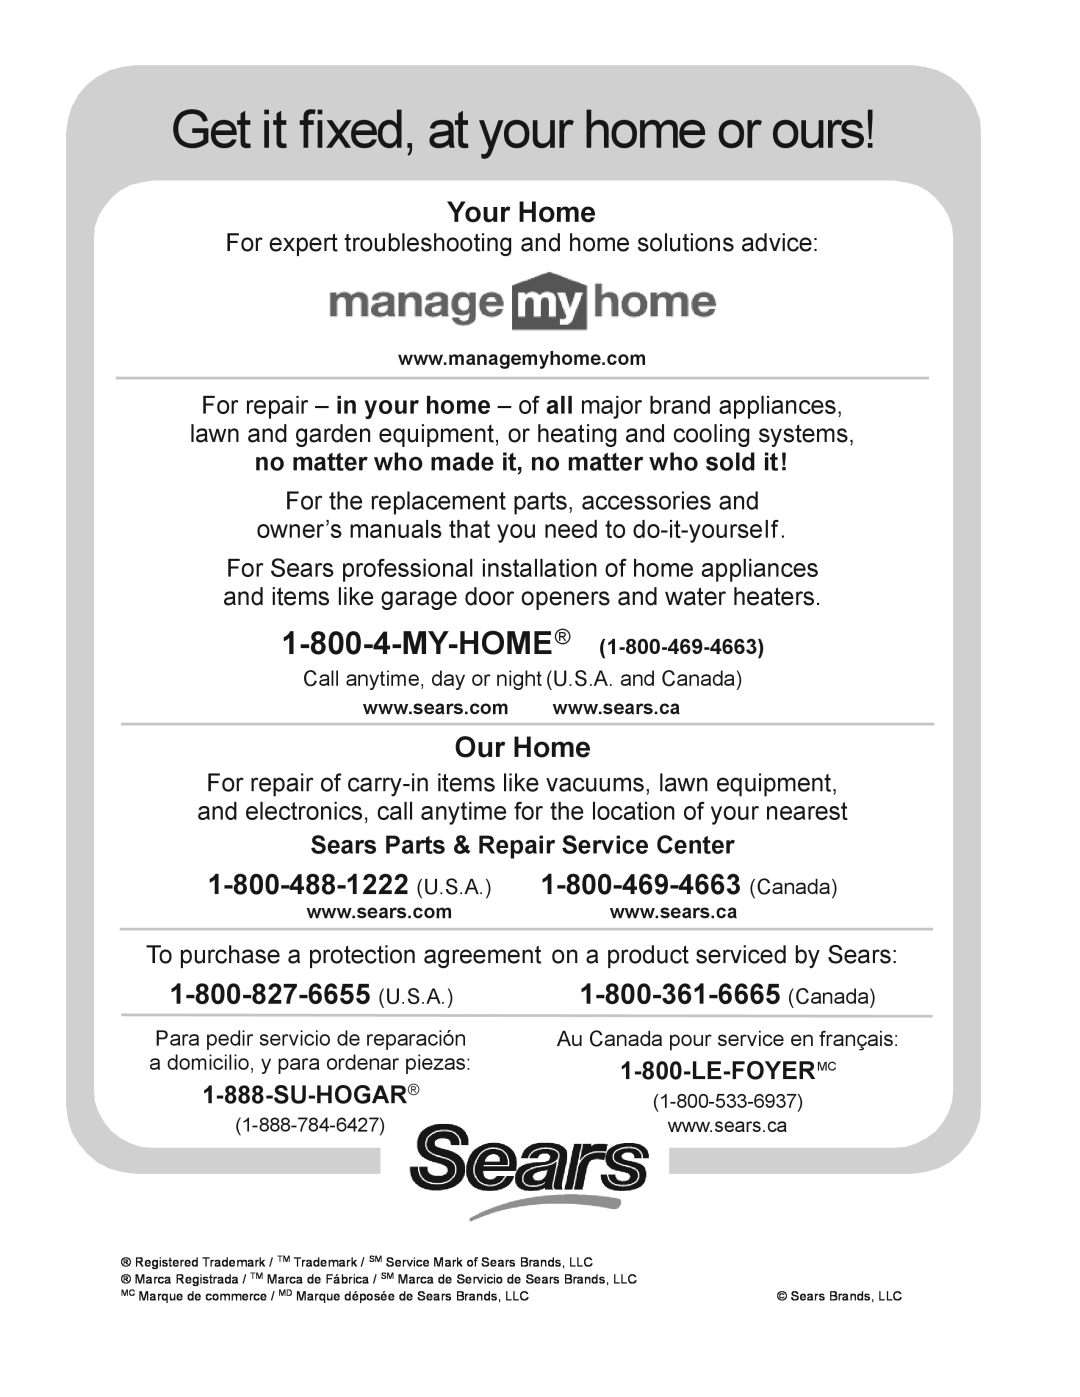 Kenmore 153.339432 Sears Parts & Repair Service Center, Su-Hogar, Get it fixed, at your home or ours, Your Home, Our Home 